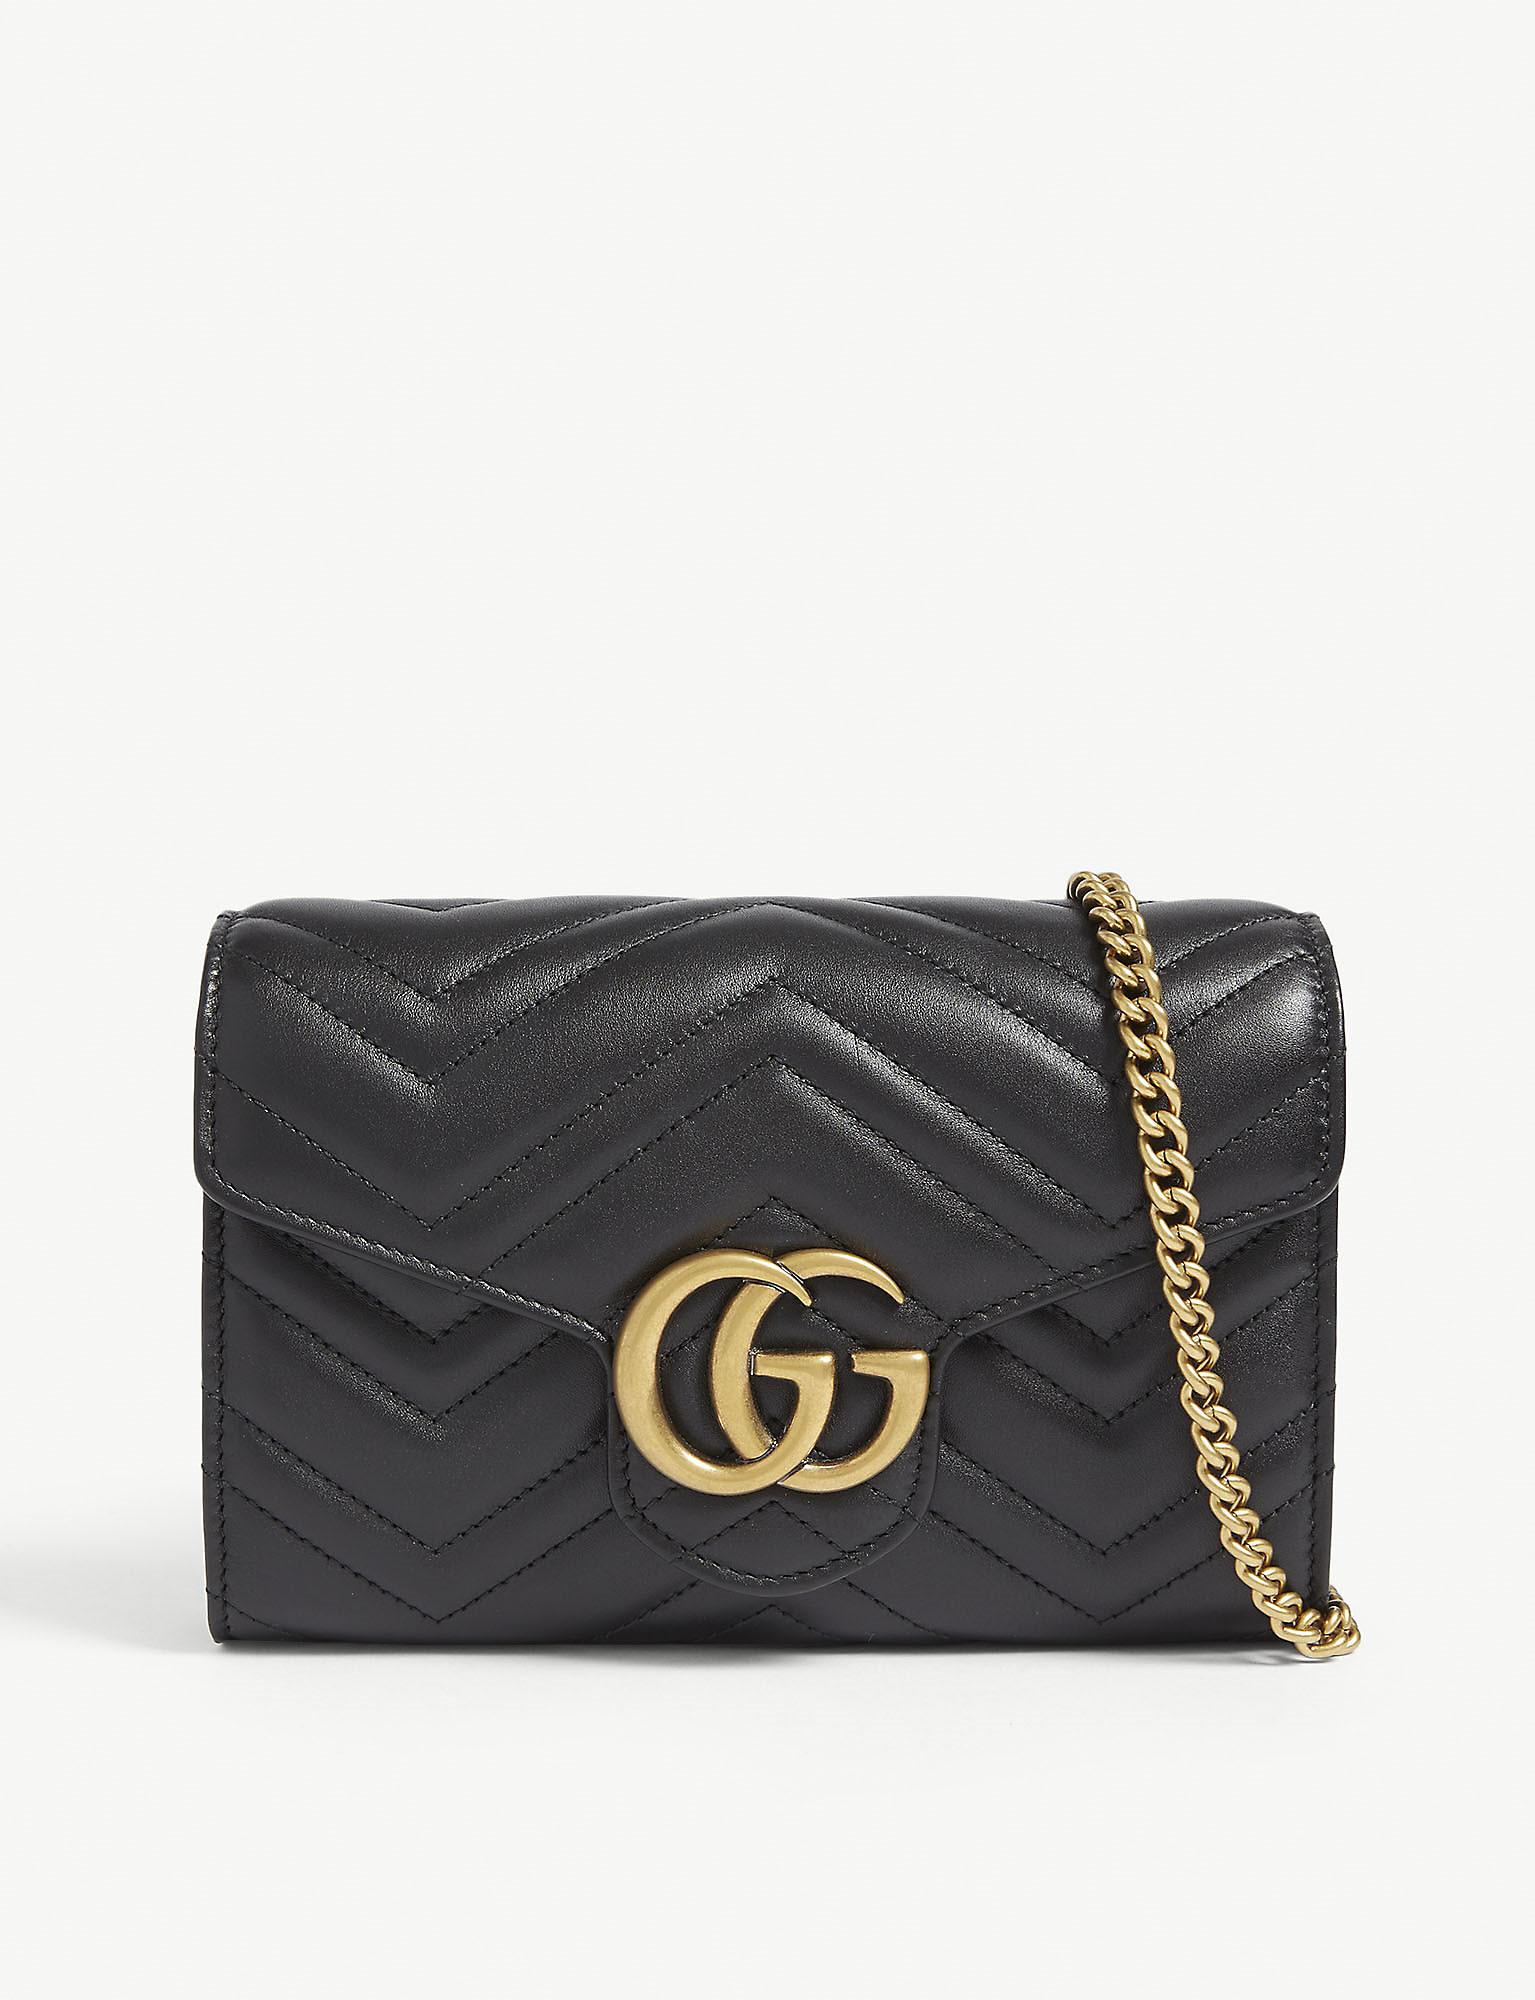 Gucci GG Marmont Leather Wallet On Chain in Black - Lyst